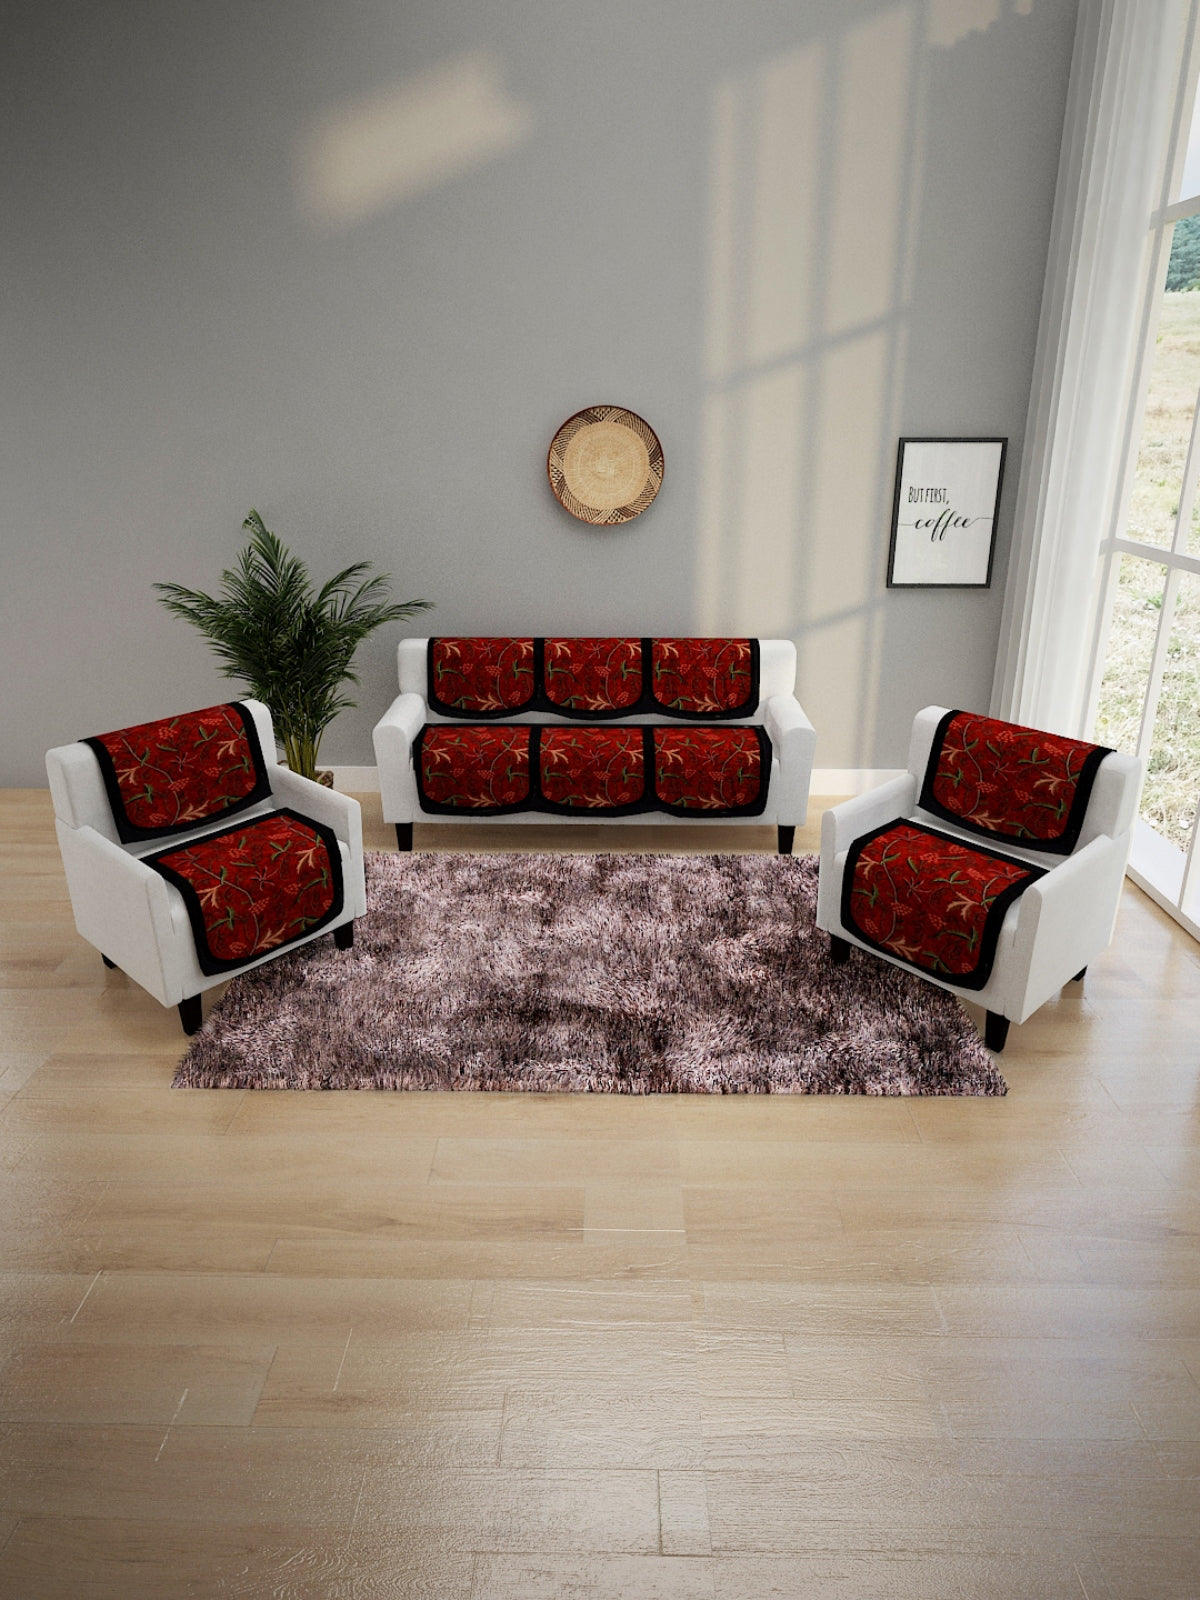 6-Pieces Red Woven Design 5-Seater Sofa Covers